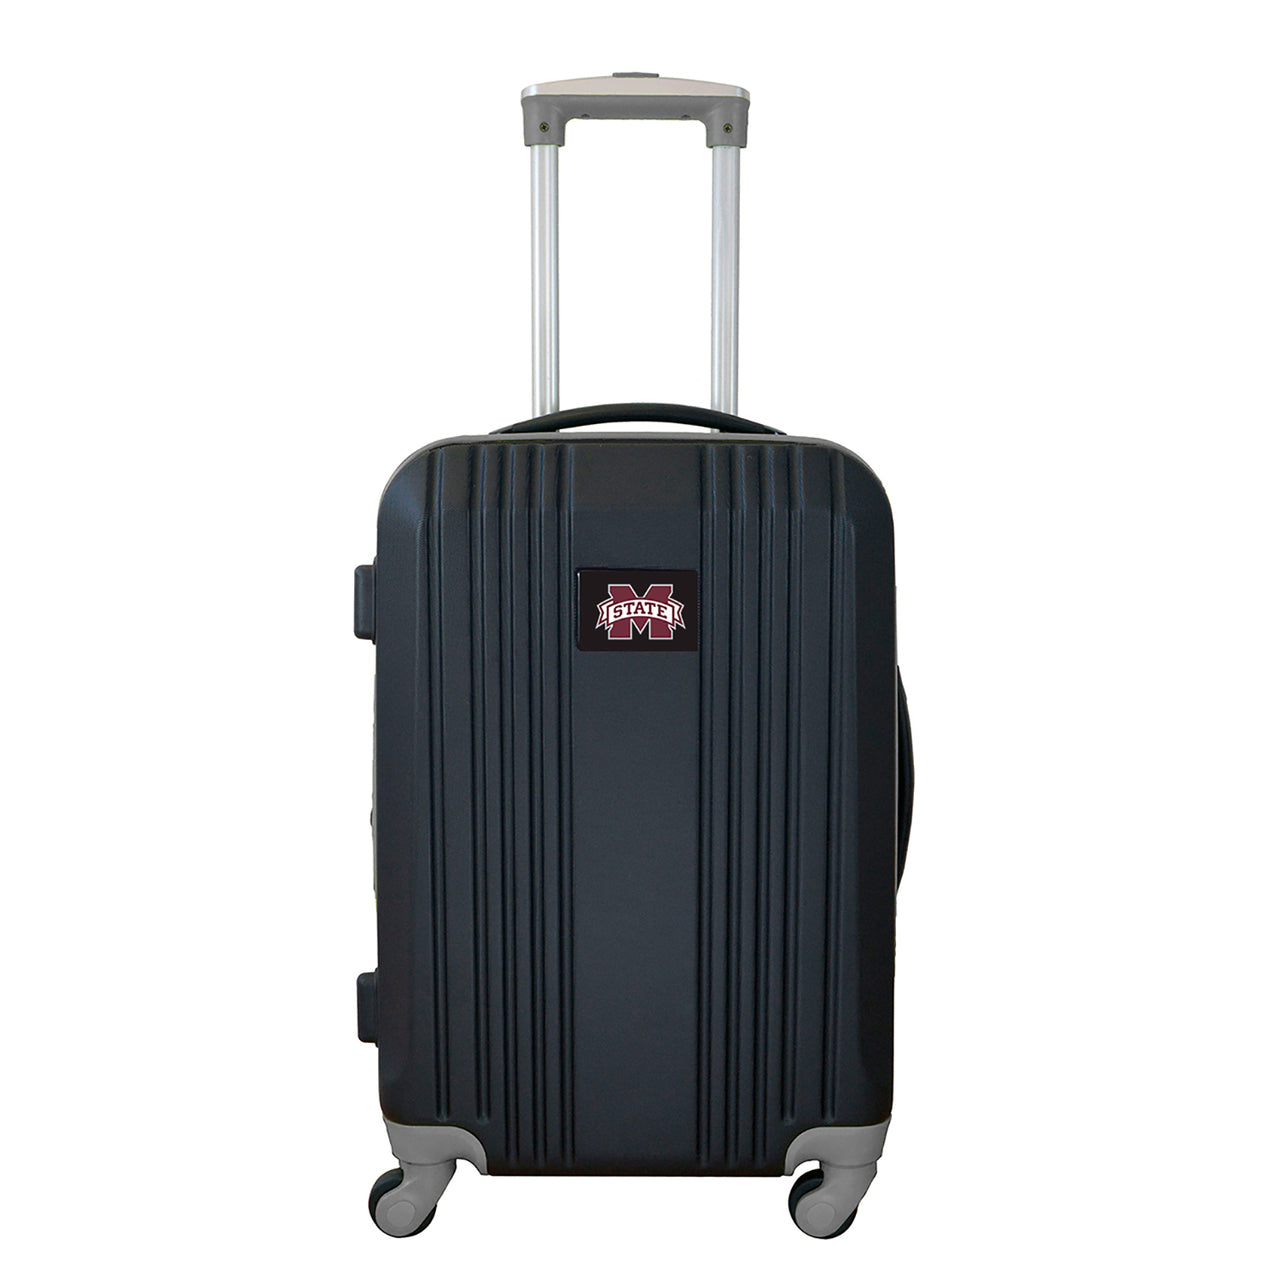 Mississippi State Carry On Spinner Luggage | Mississippi State Hardcase Two-Tone Luggage Carry-on Spinner in Black